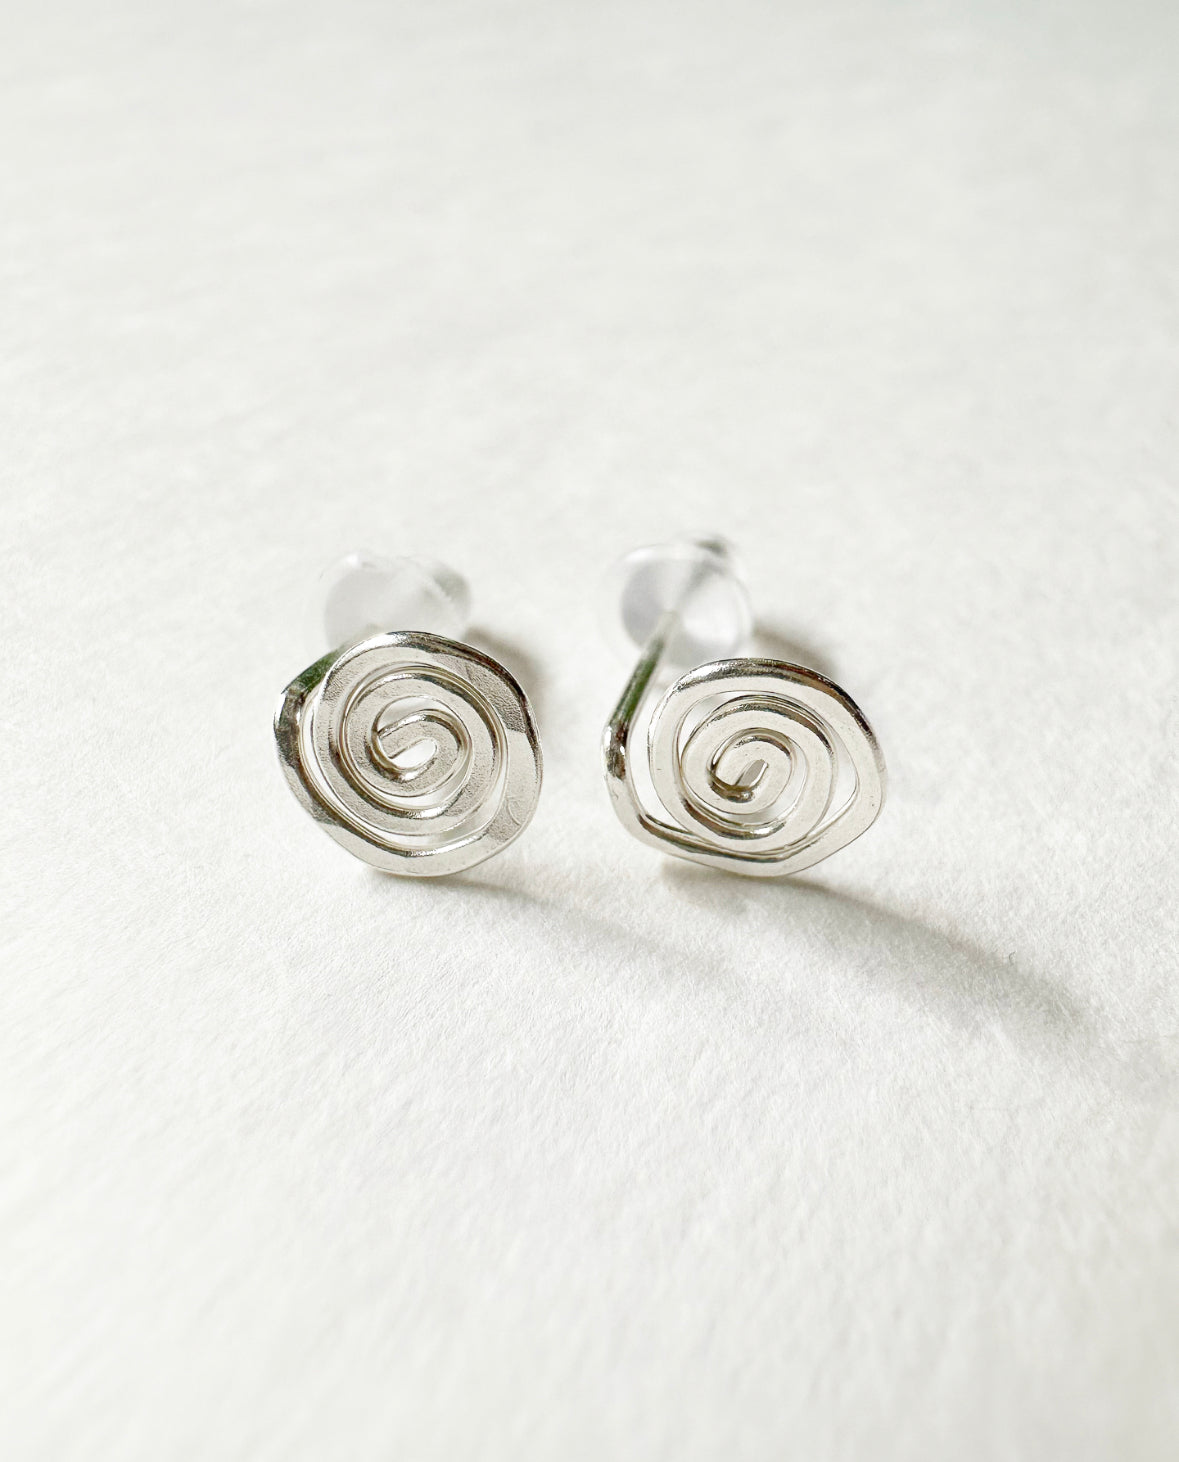 Close-up of 925 Sterling Silver Vortex Stud Earrings.